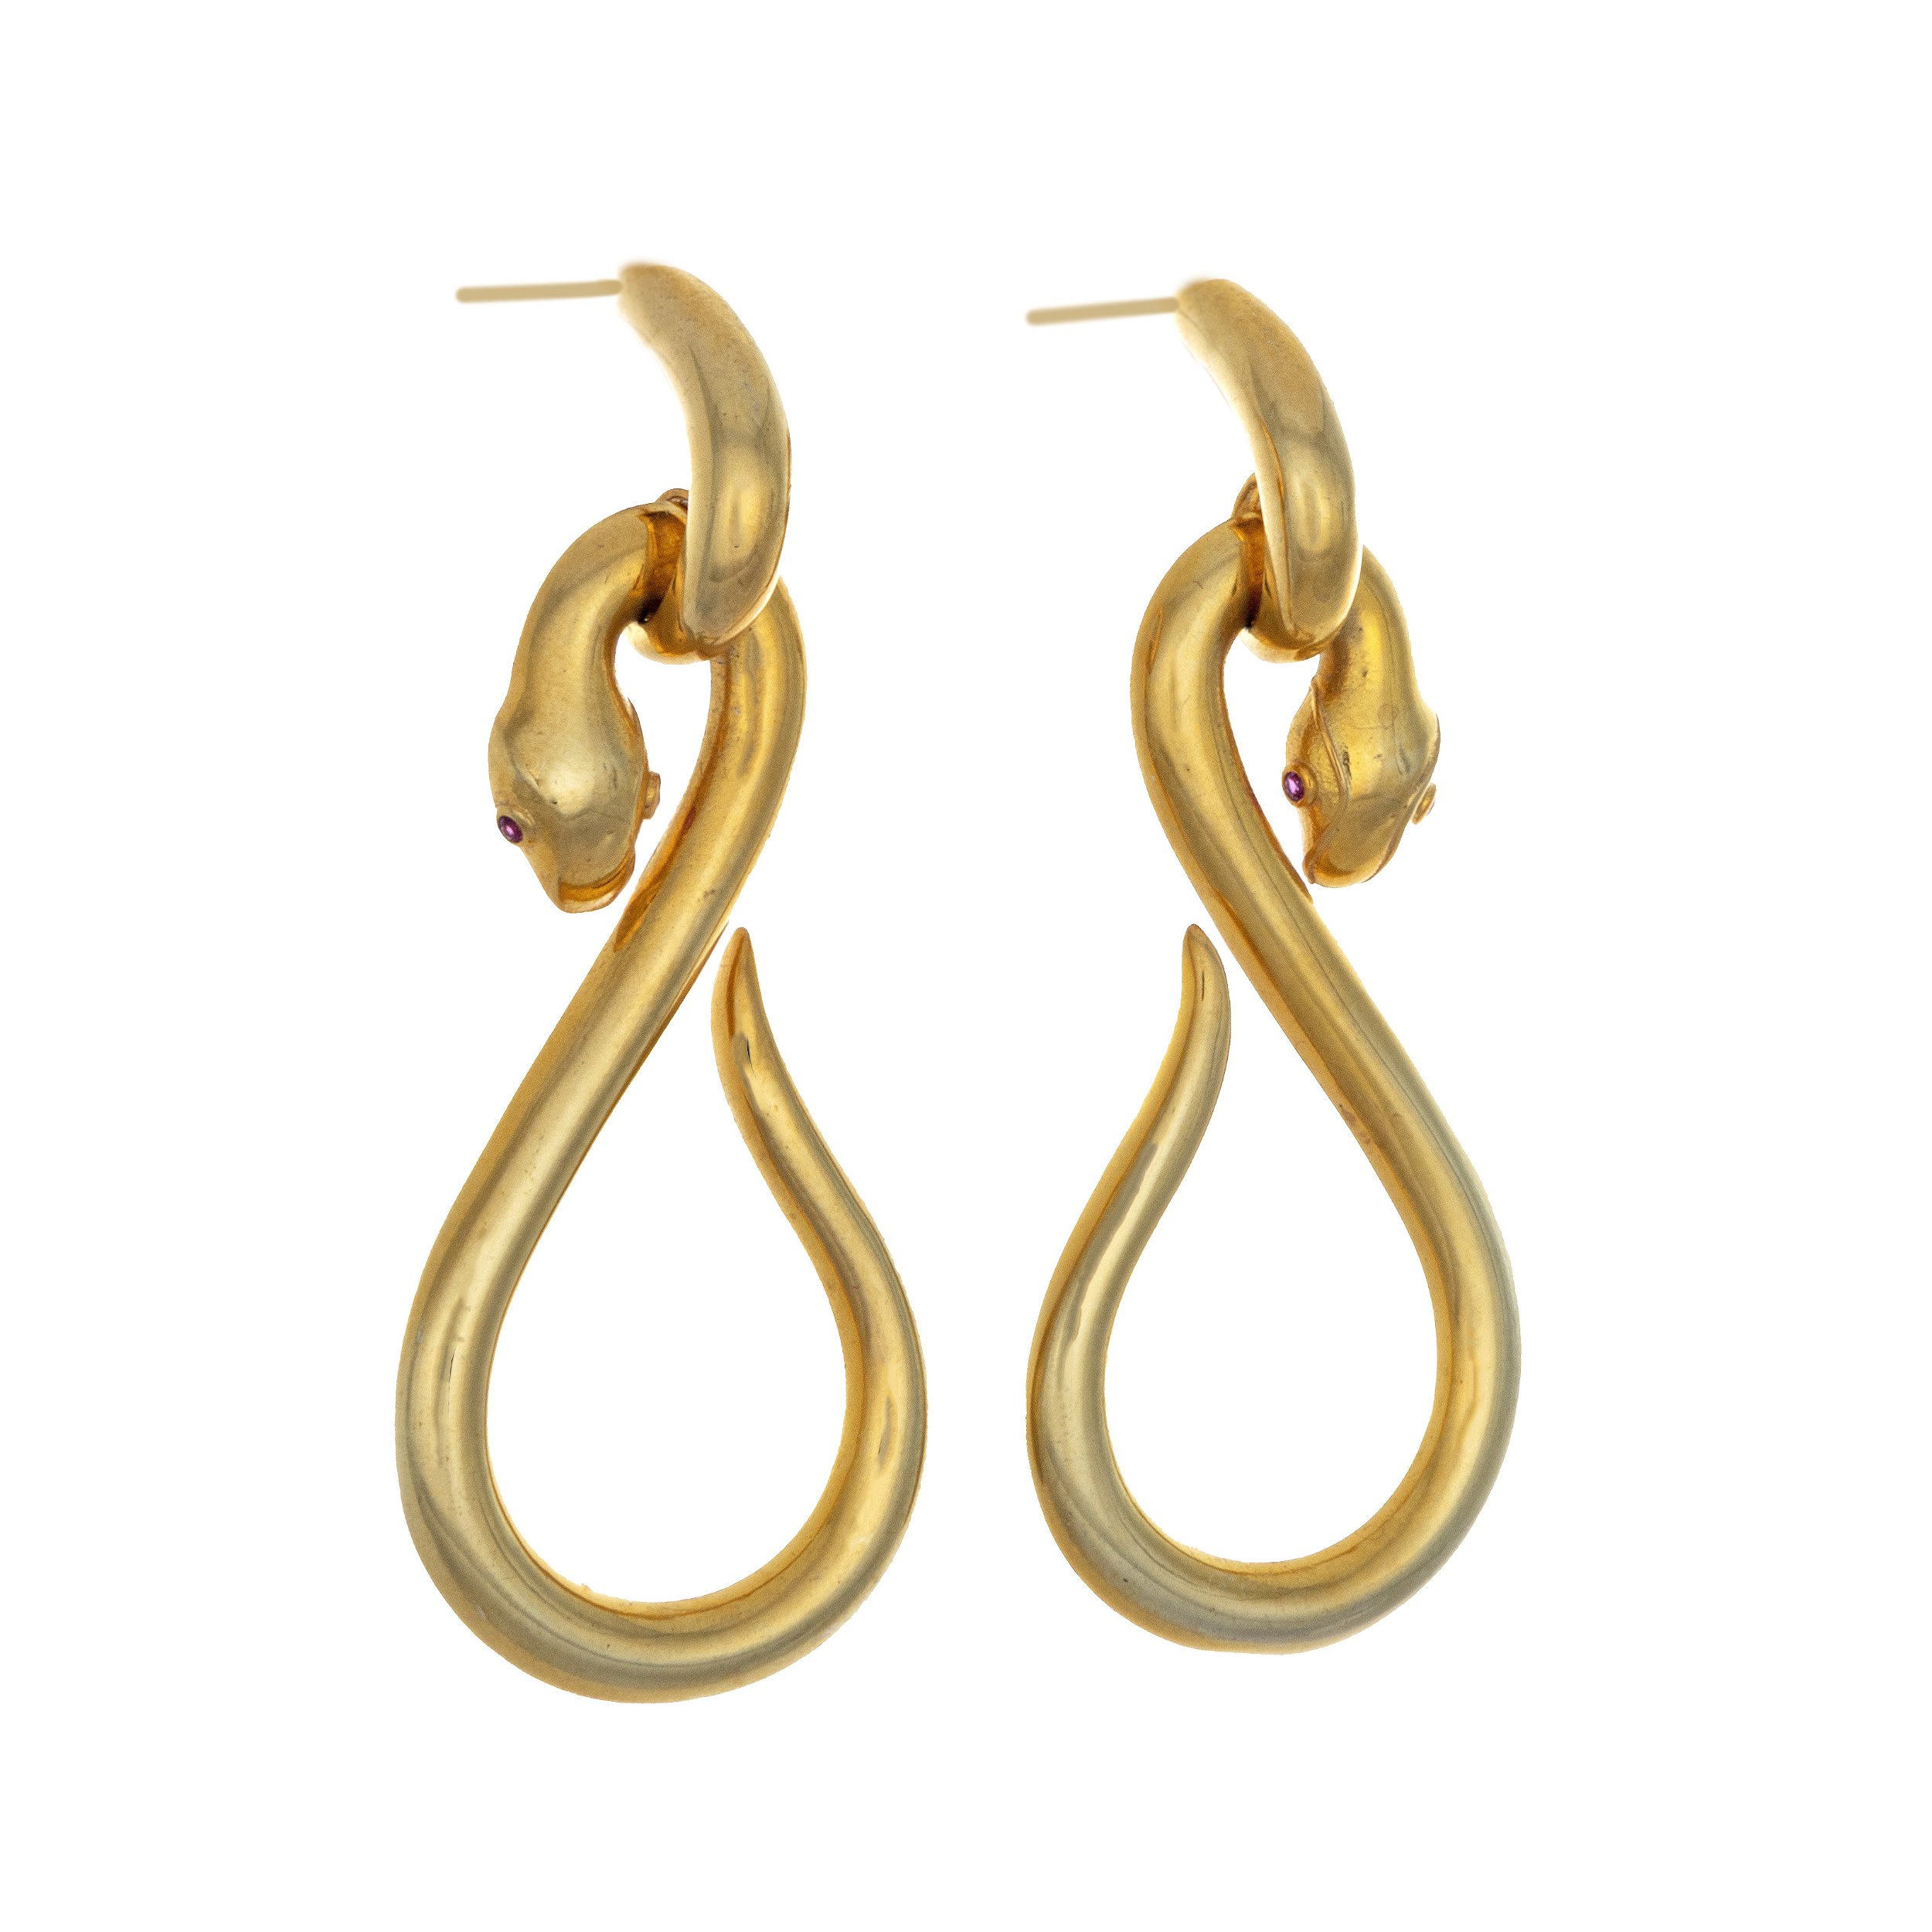 Gold Vermeil Snake Dangle Earrings On-post - 925 Armasa Silver Curling Snake With Magenta Crystal Eyes - Full Gold Vermeil Finish & Huggee Post